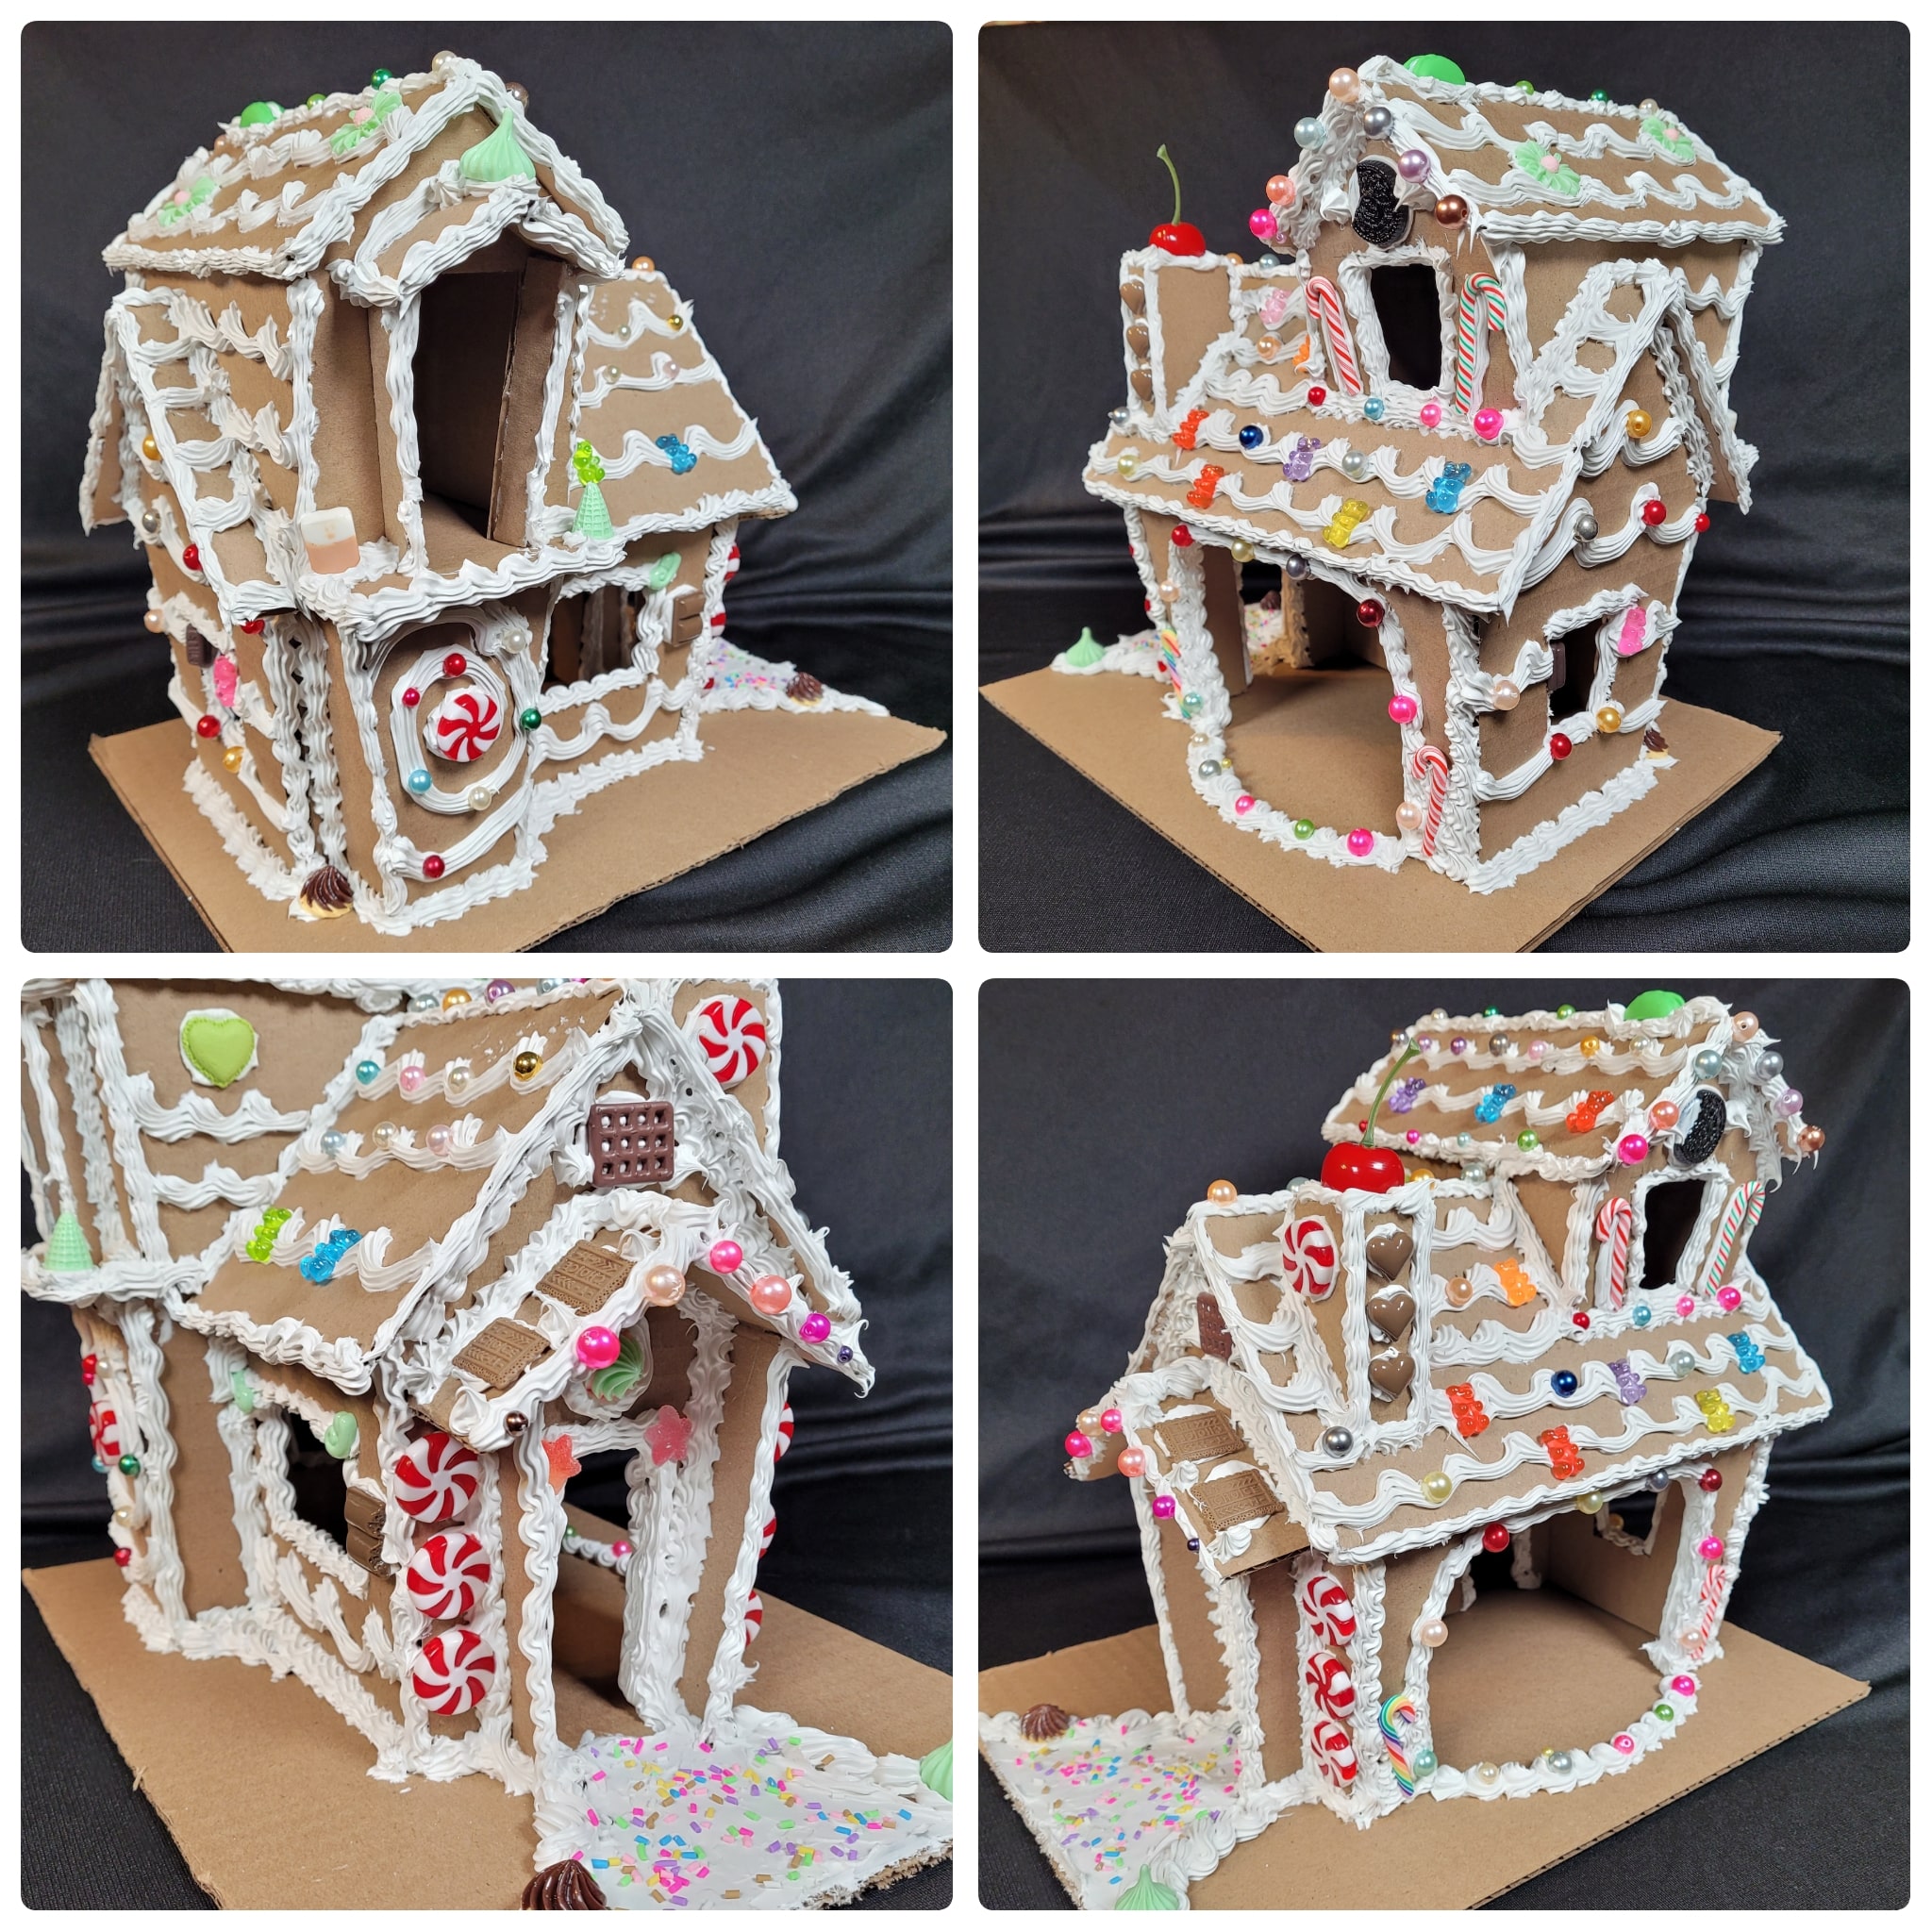 Different views of a sample gingerbread house